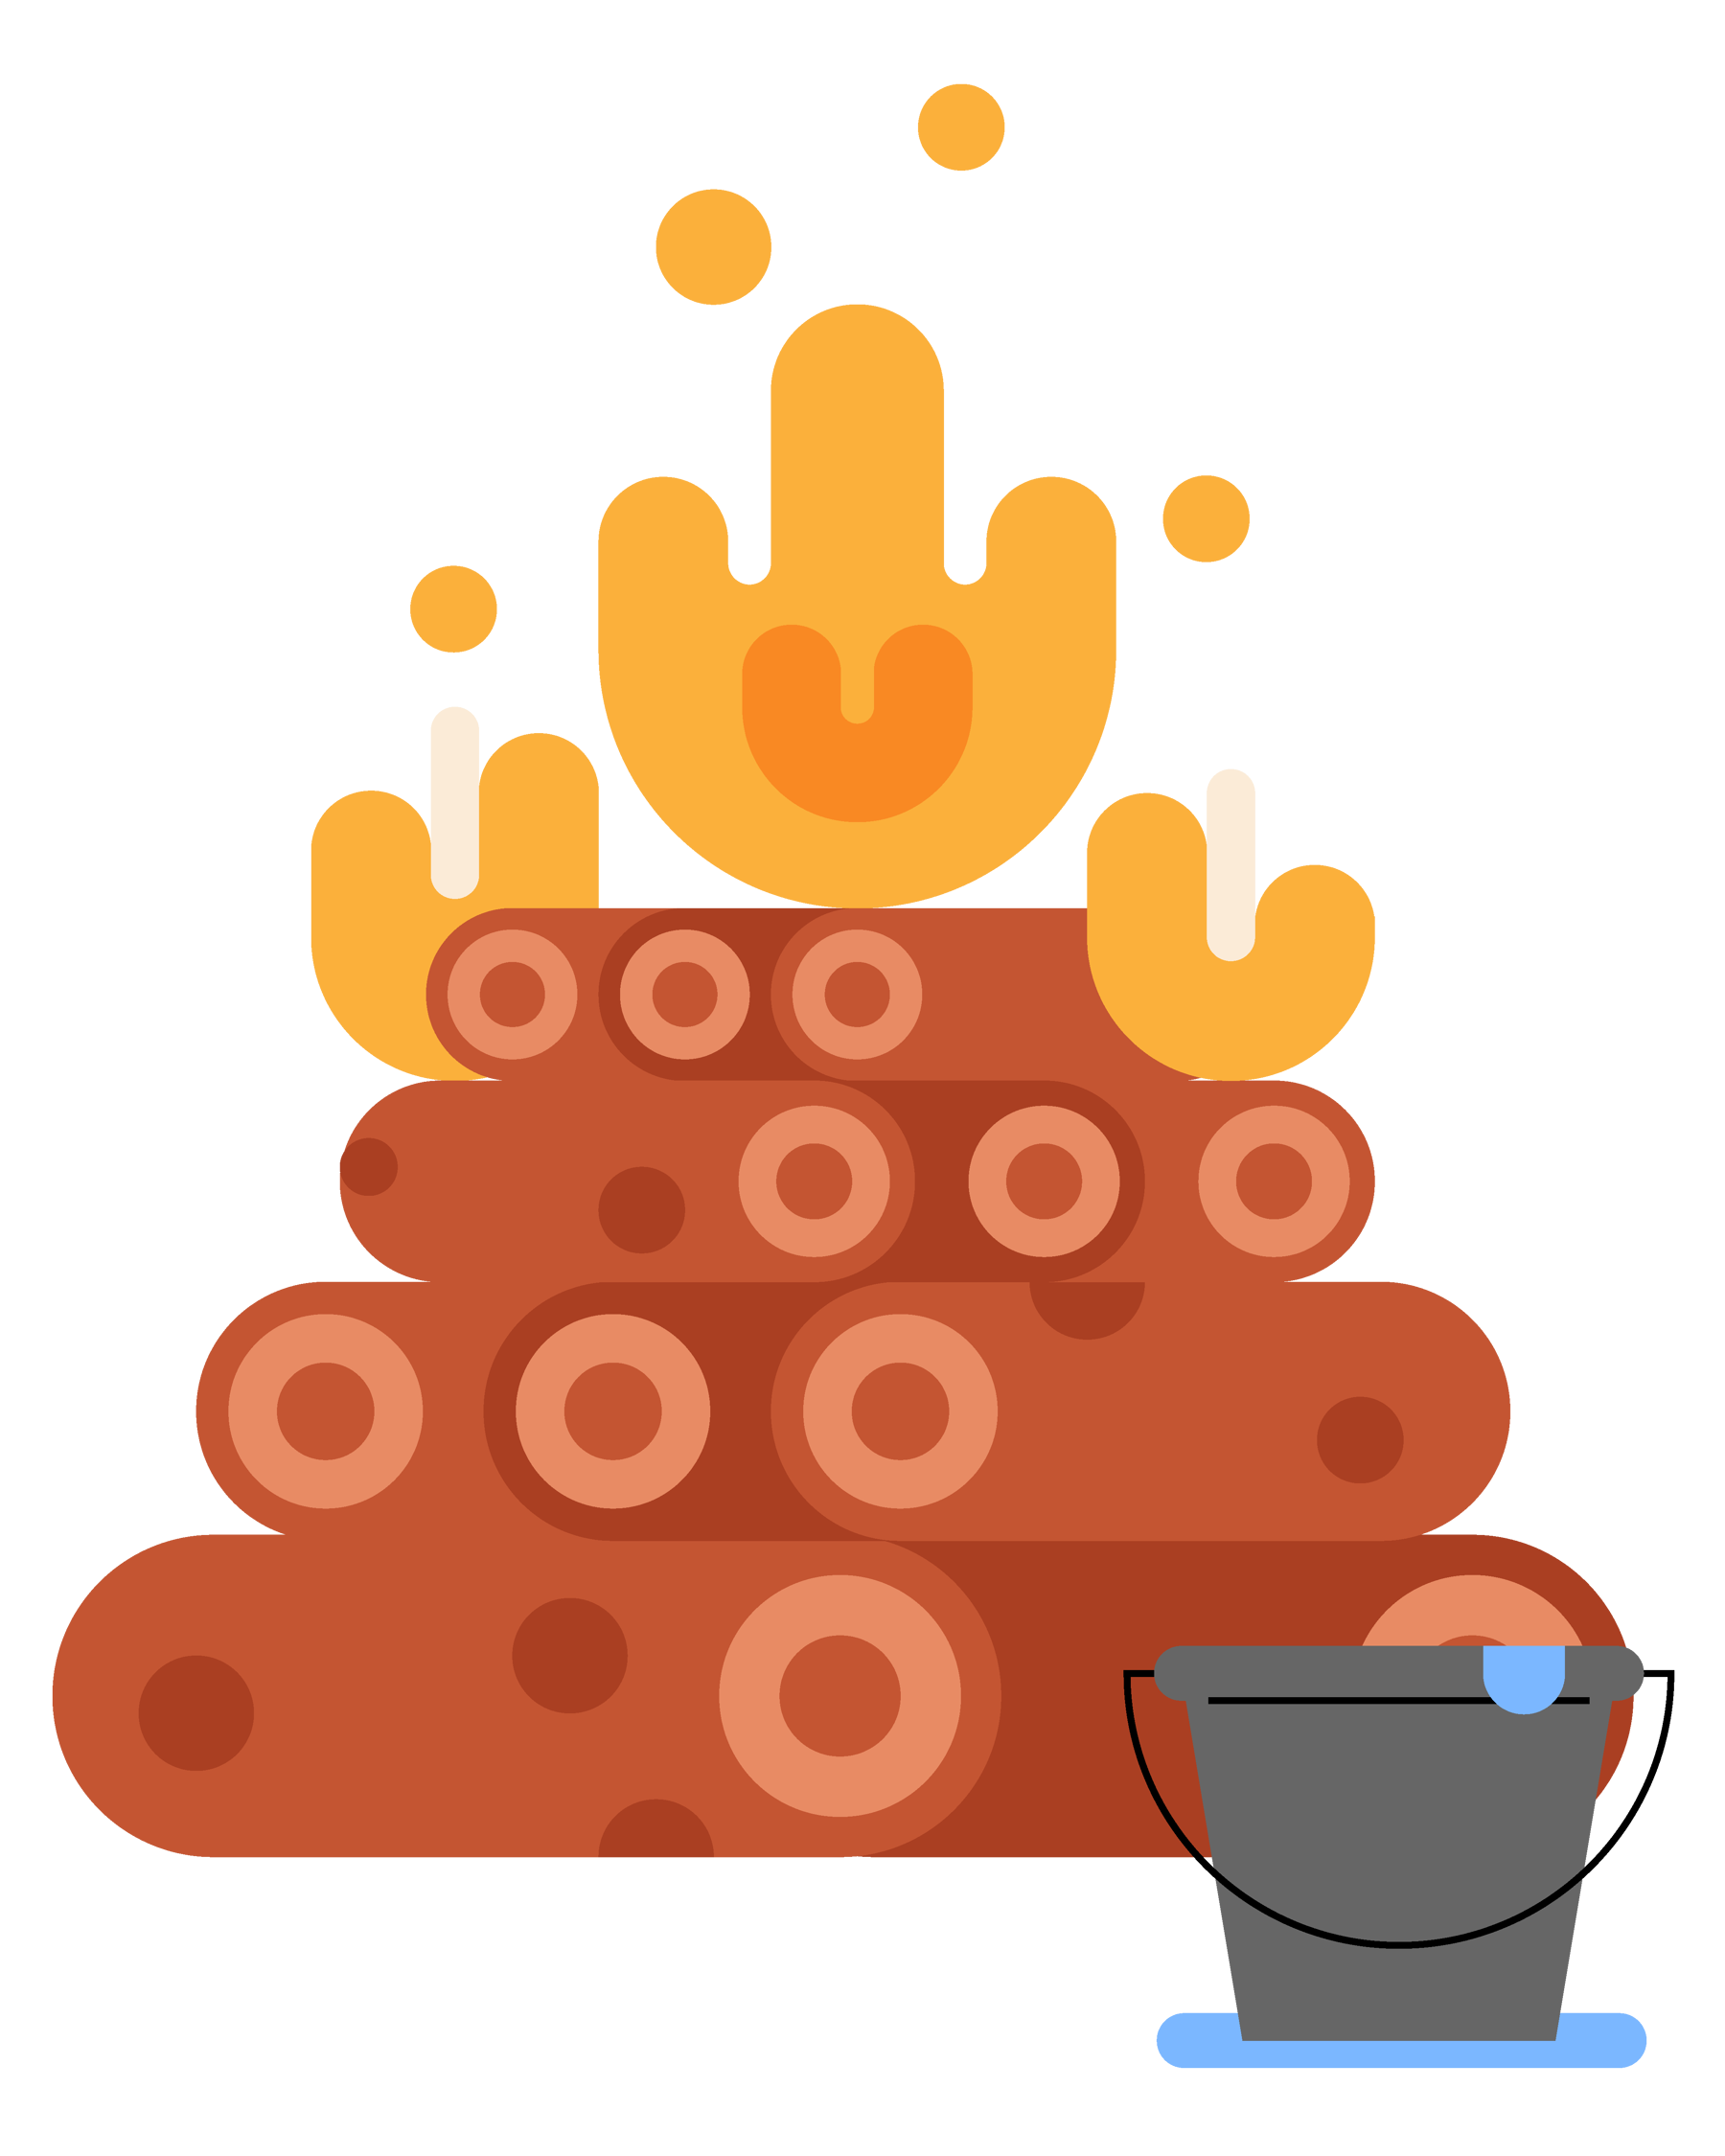 An illustration of a ground fire with tower, with a bucket of water placed next to it.